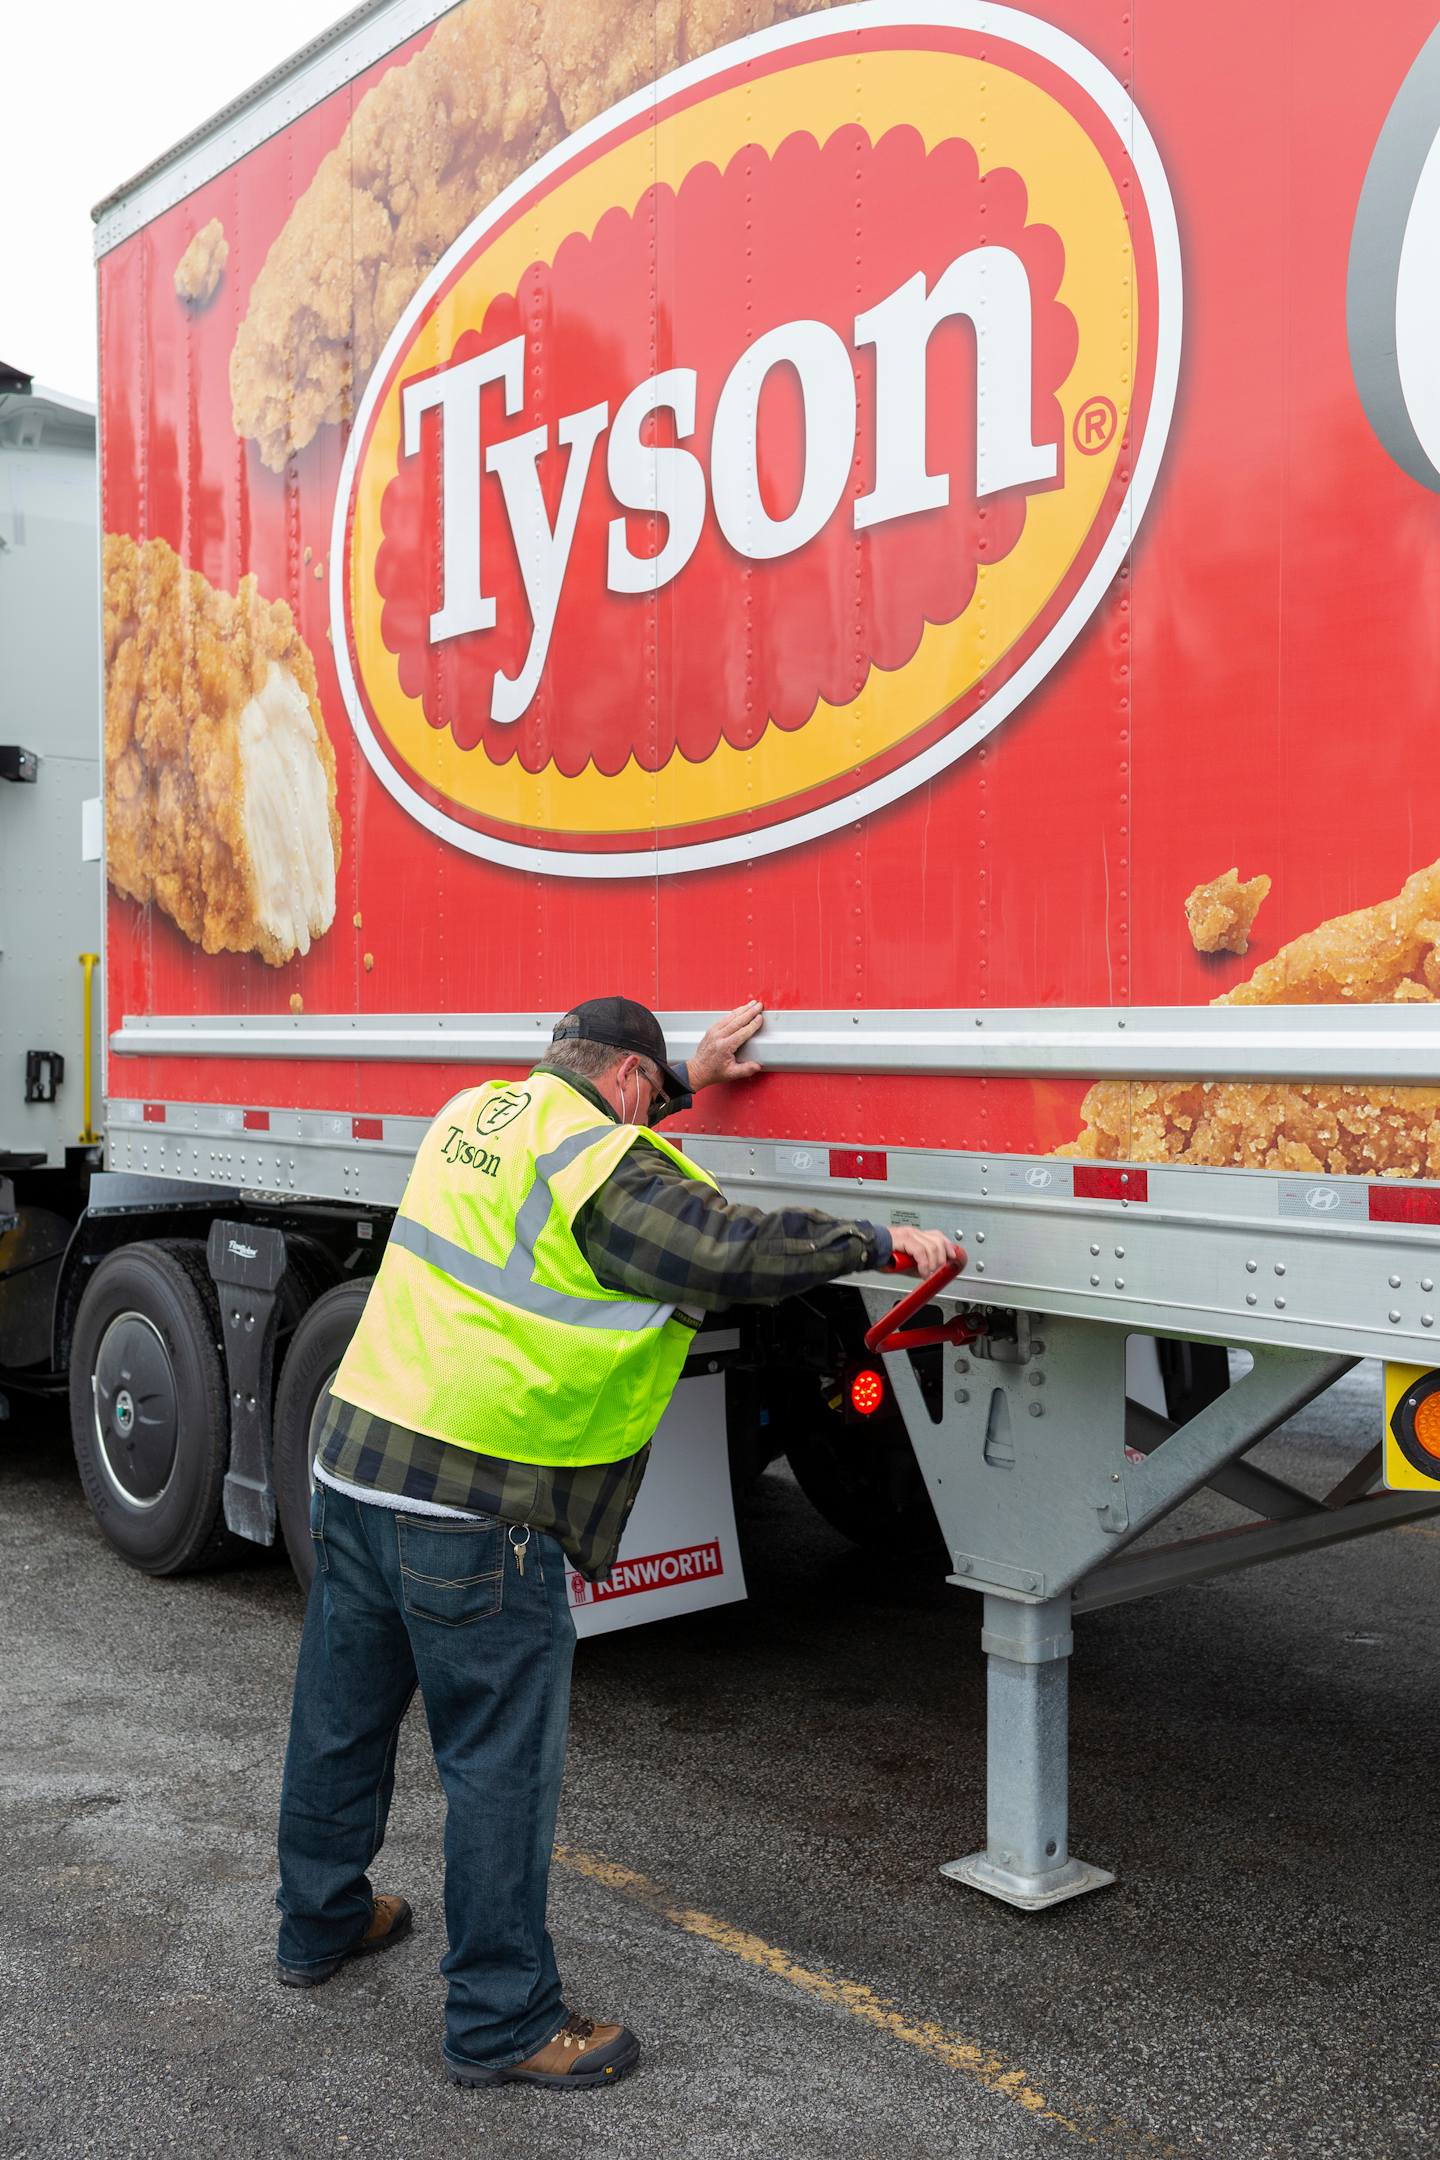 Tyson’s private fl eet drivers have a 97% to 98% on-time delivery rate this year.